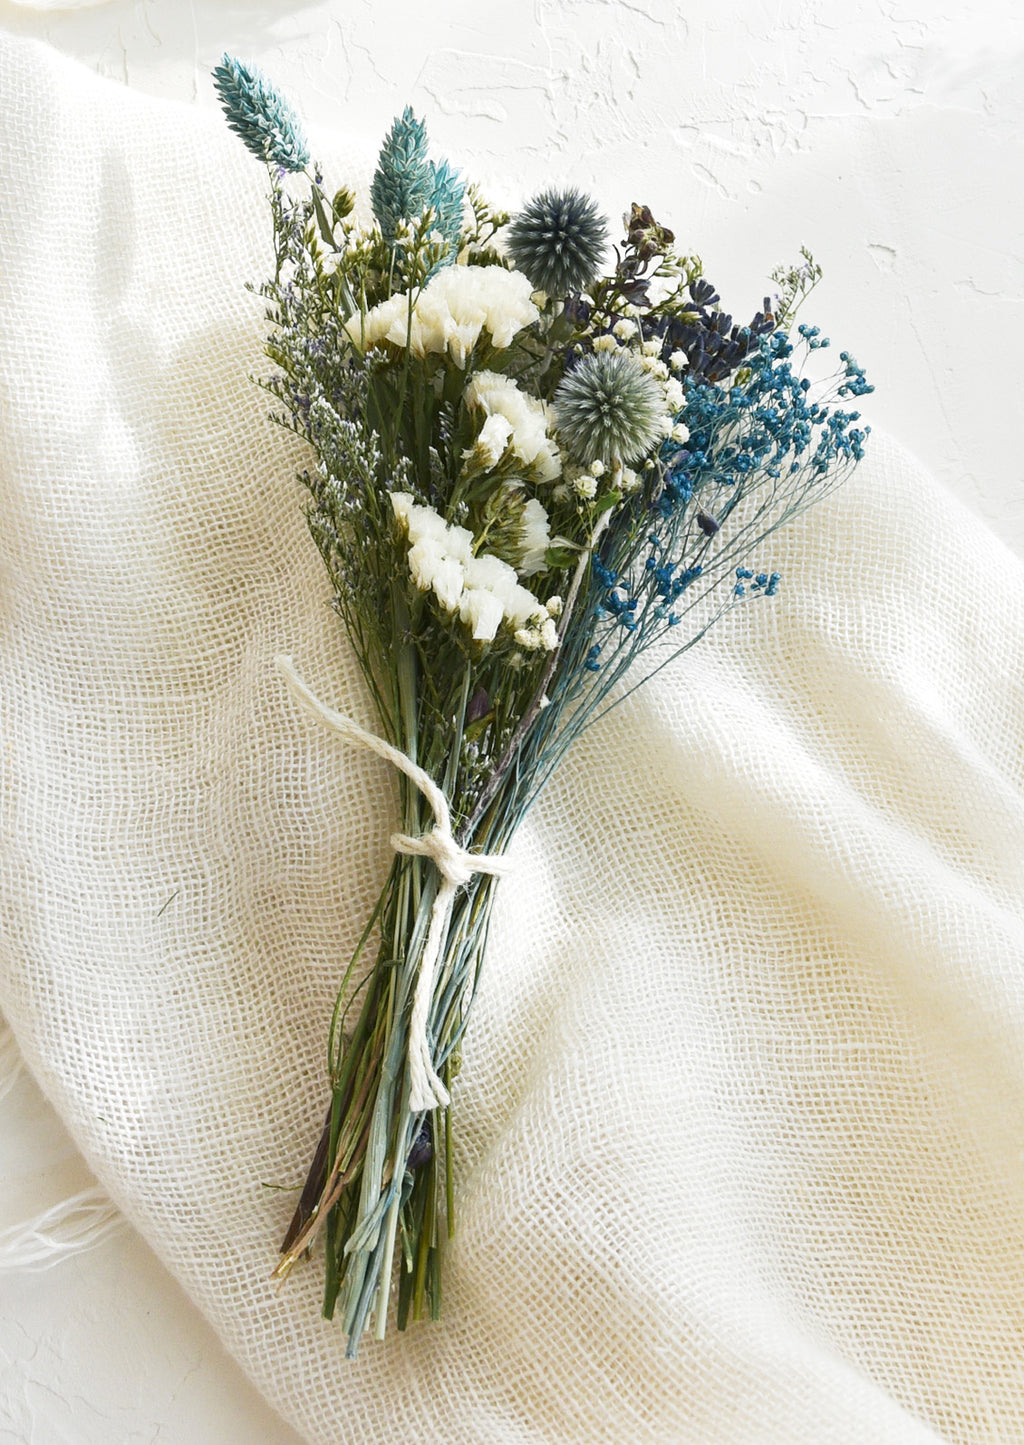 Coastal Multi: A bouquet of dried flowers in a blue and white mix.